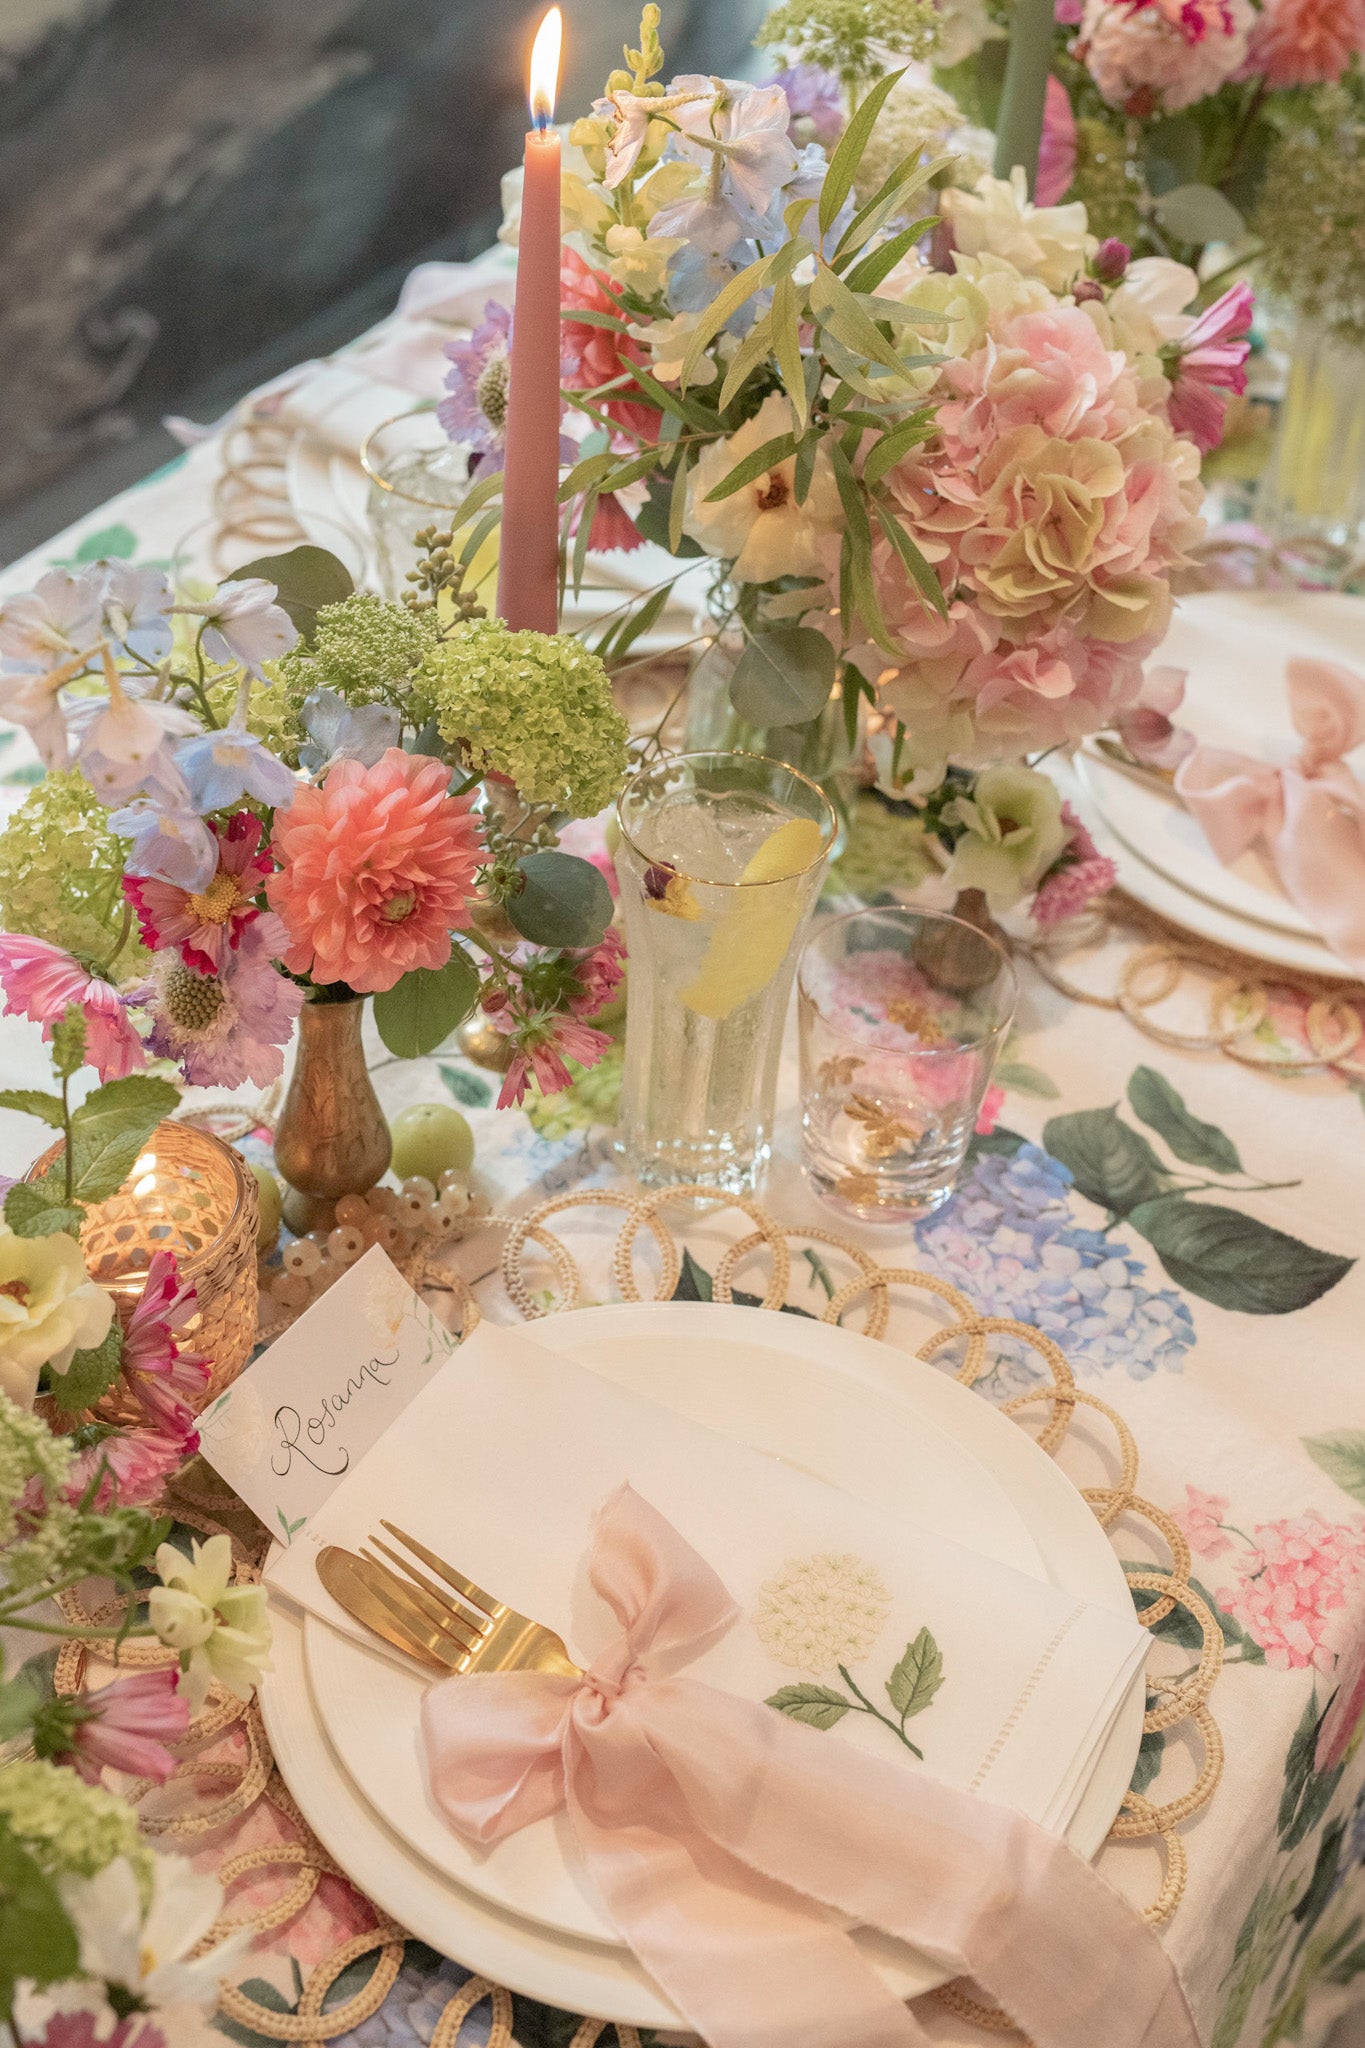 Late summer tablescape by Rosanna Falconer with florals